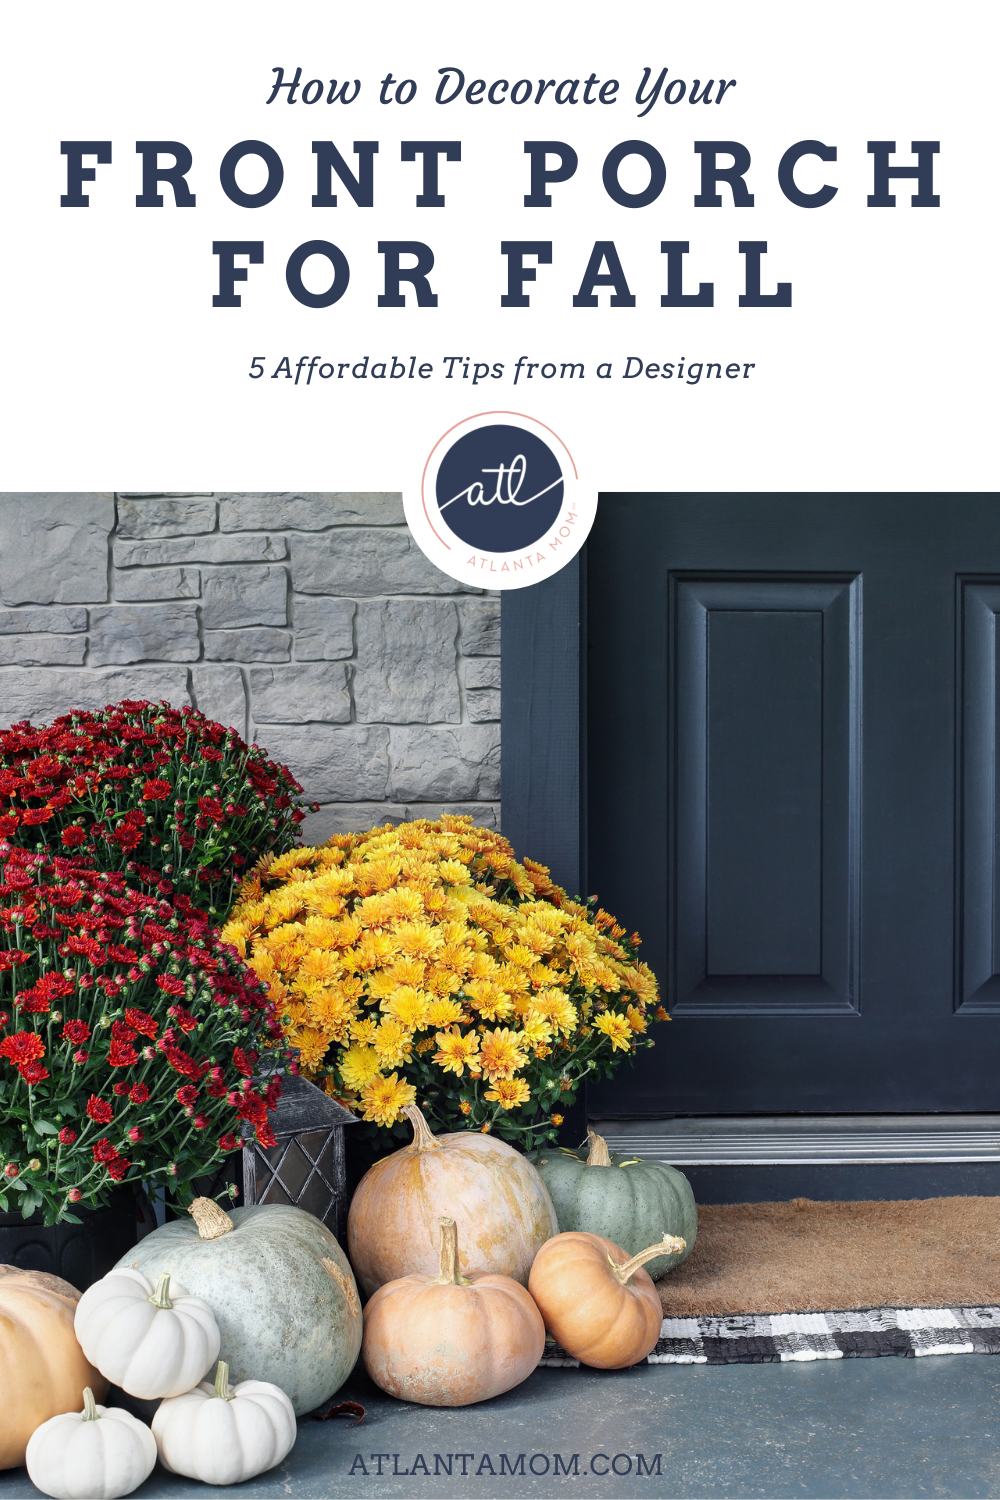 How to Decorate Your Front Porch for Fall